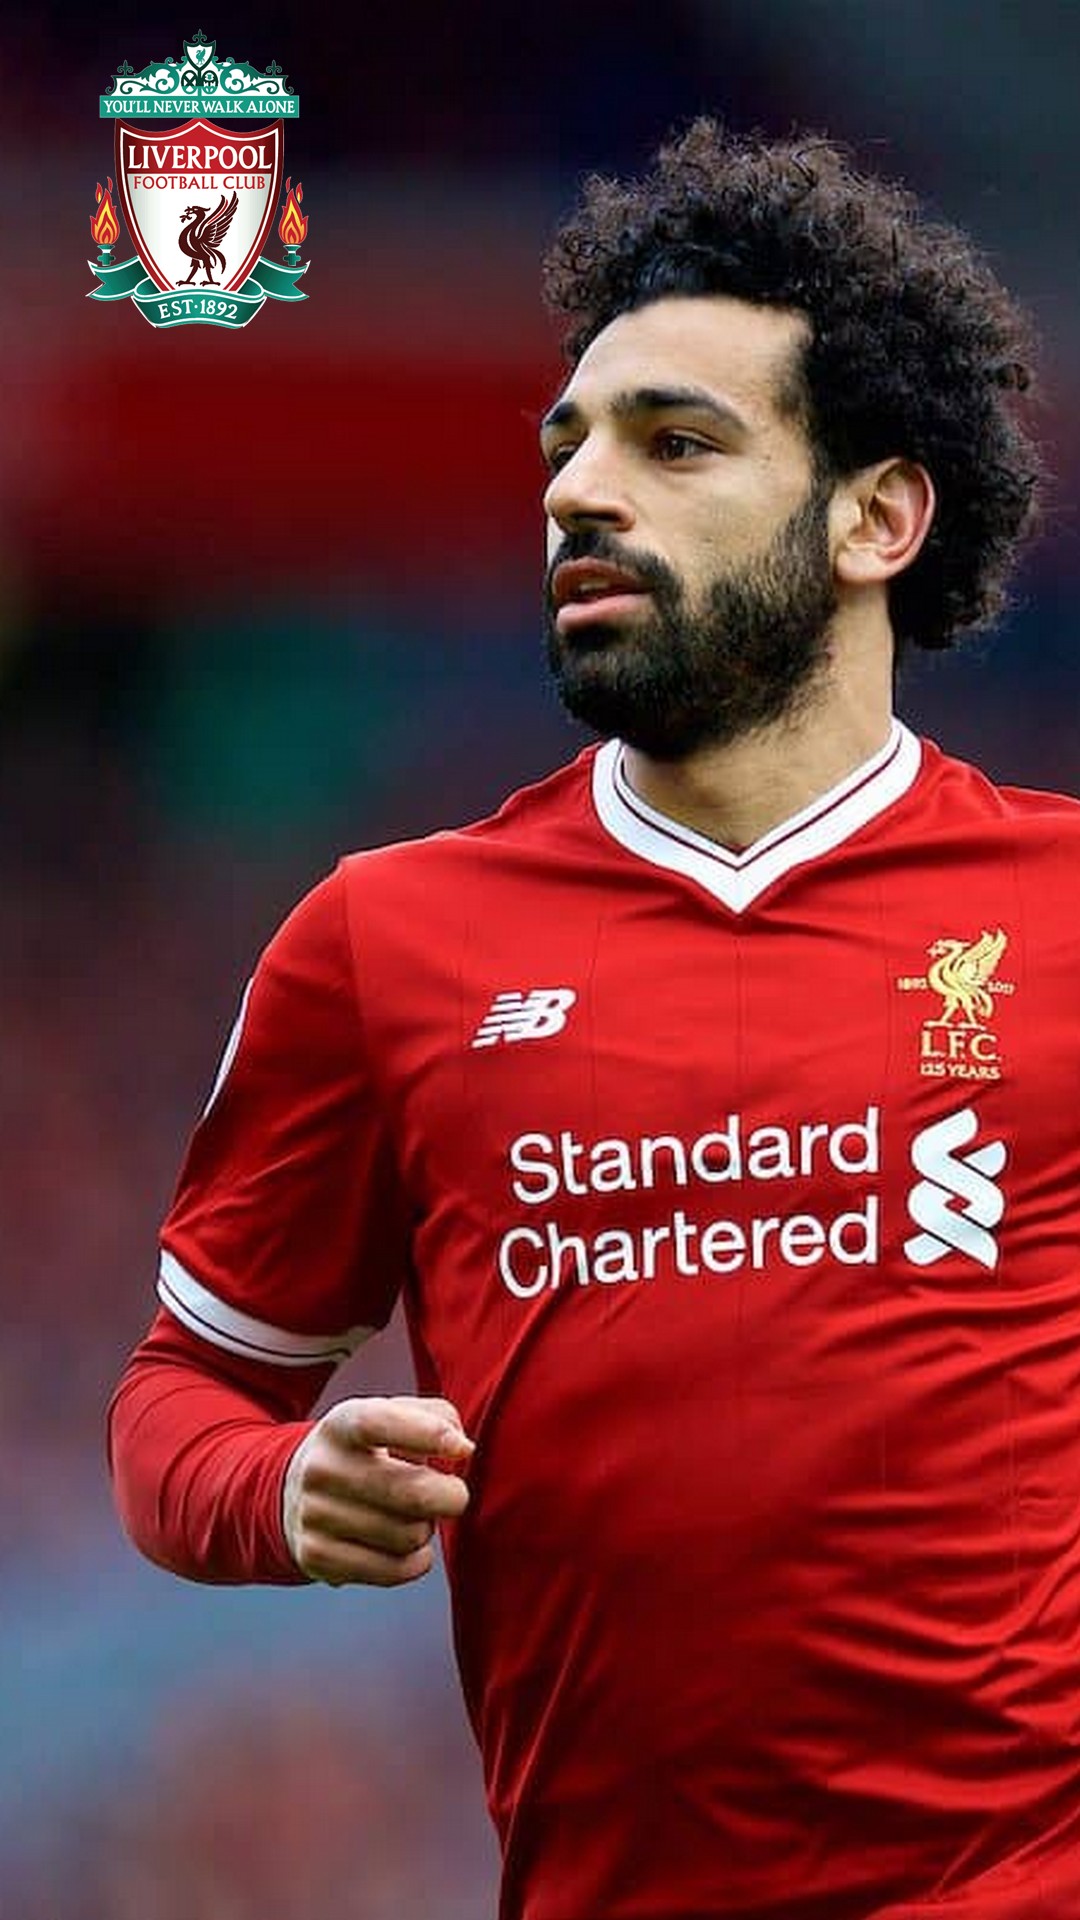 Free download Mohamed Salah Liverpool Wallpaper For iPhone 2019 3D iPhone [1080x1920] for your Desktop, Mobile & Tablet. Explore Liverpool 2019 Wallpaper. Liverpool 2019 Wallpaper, Liverpool Champions League Final 2019 Wallpaper, Liverpool FC